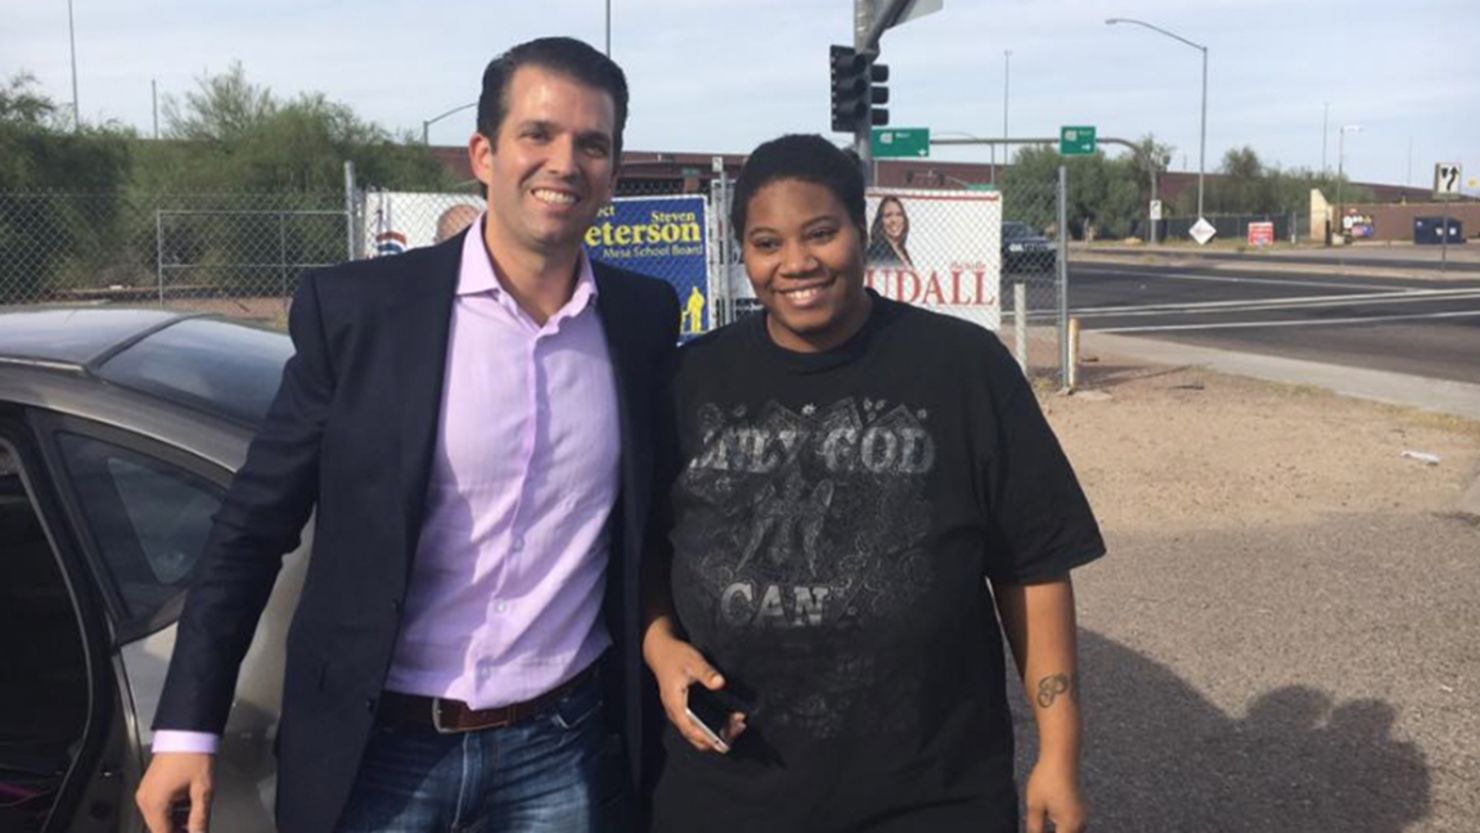 Donald Trump Jr. poses with a woman after he helps push her stalled car in Mesa, Arizona